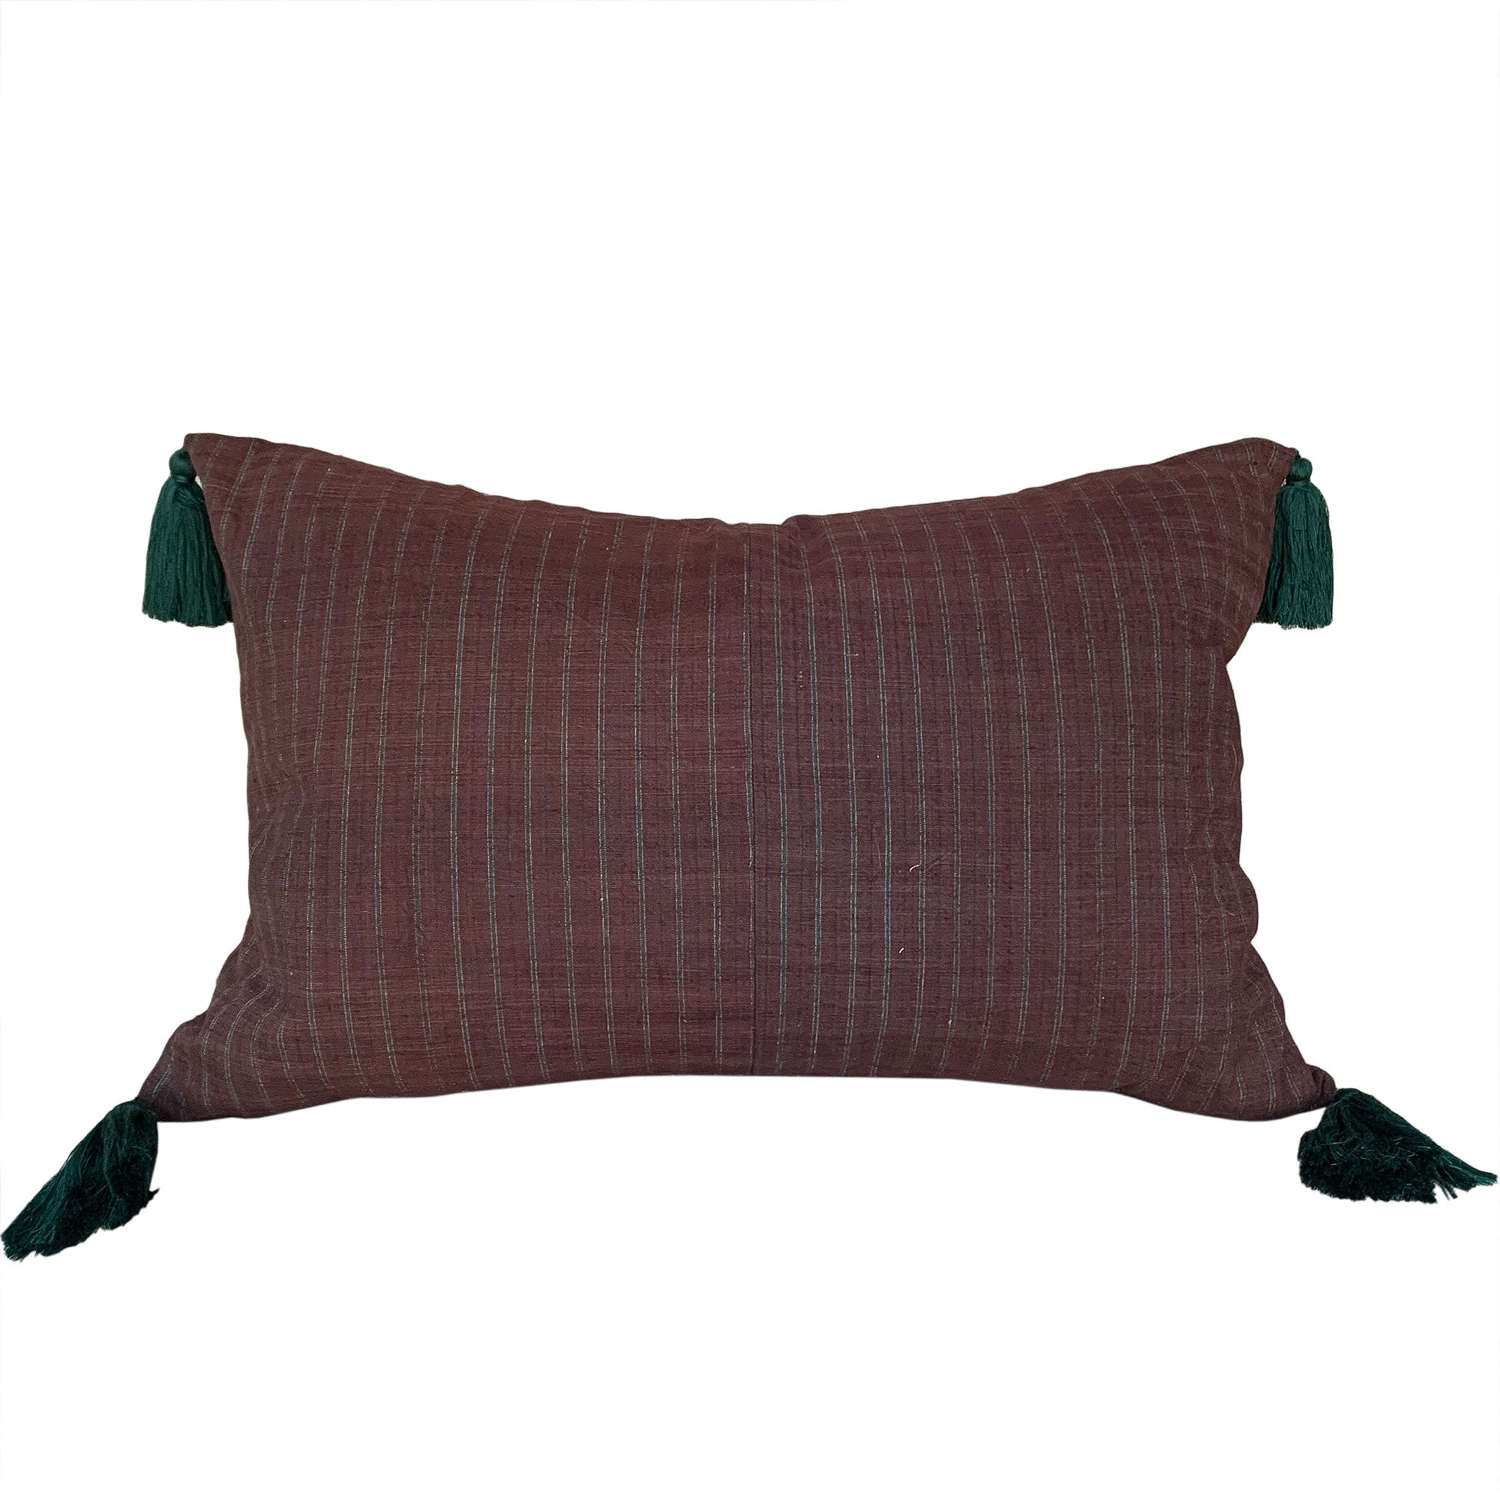 Songjiang Cushion, Brown With Green Tassels